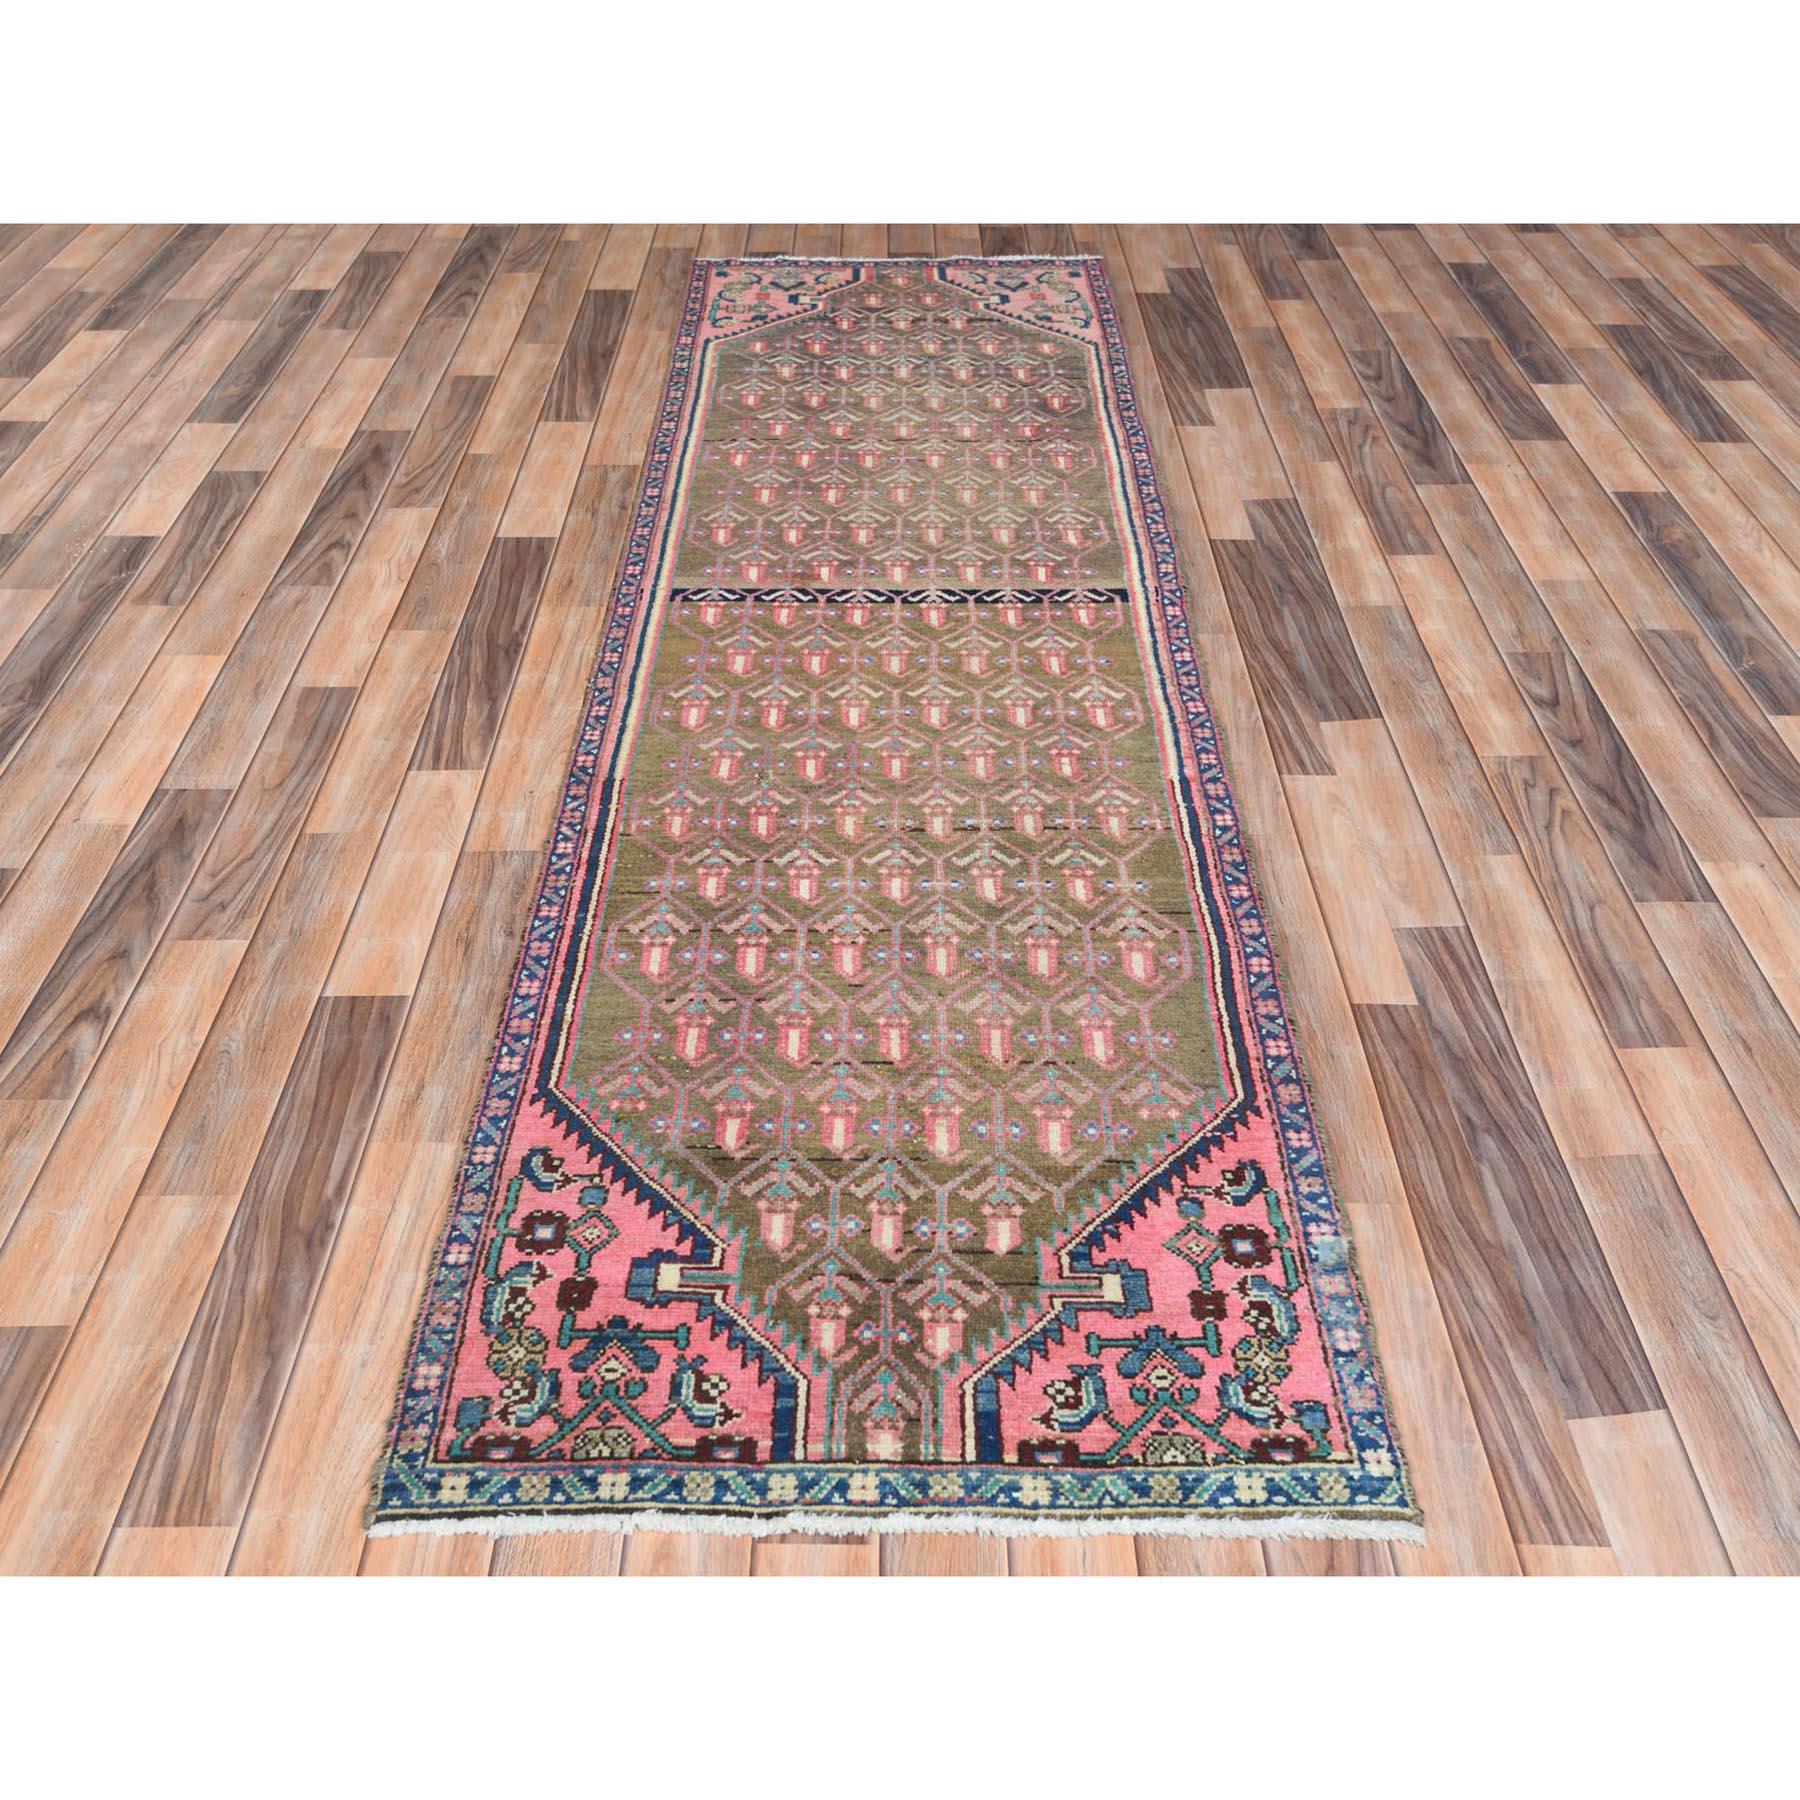 This fabulous hand-knotted carpet has been created and designed for extra strength and durability. This rug has been handcrafted for weeks in the traditional method that is used to make
Exact Rug Size in Feet and Inches : 2'8